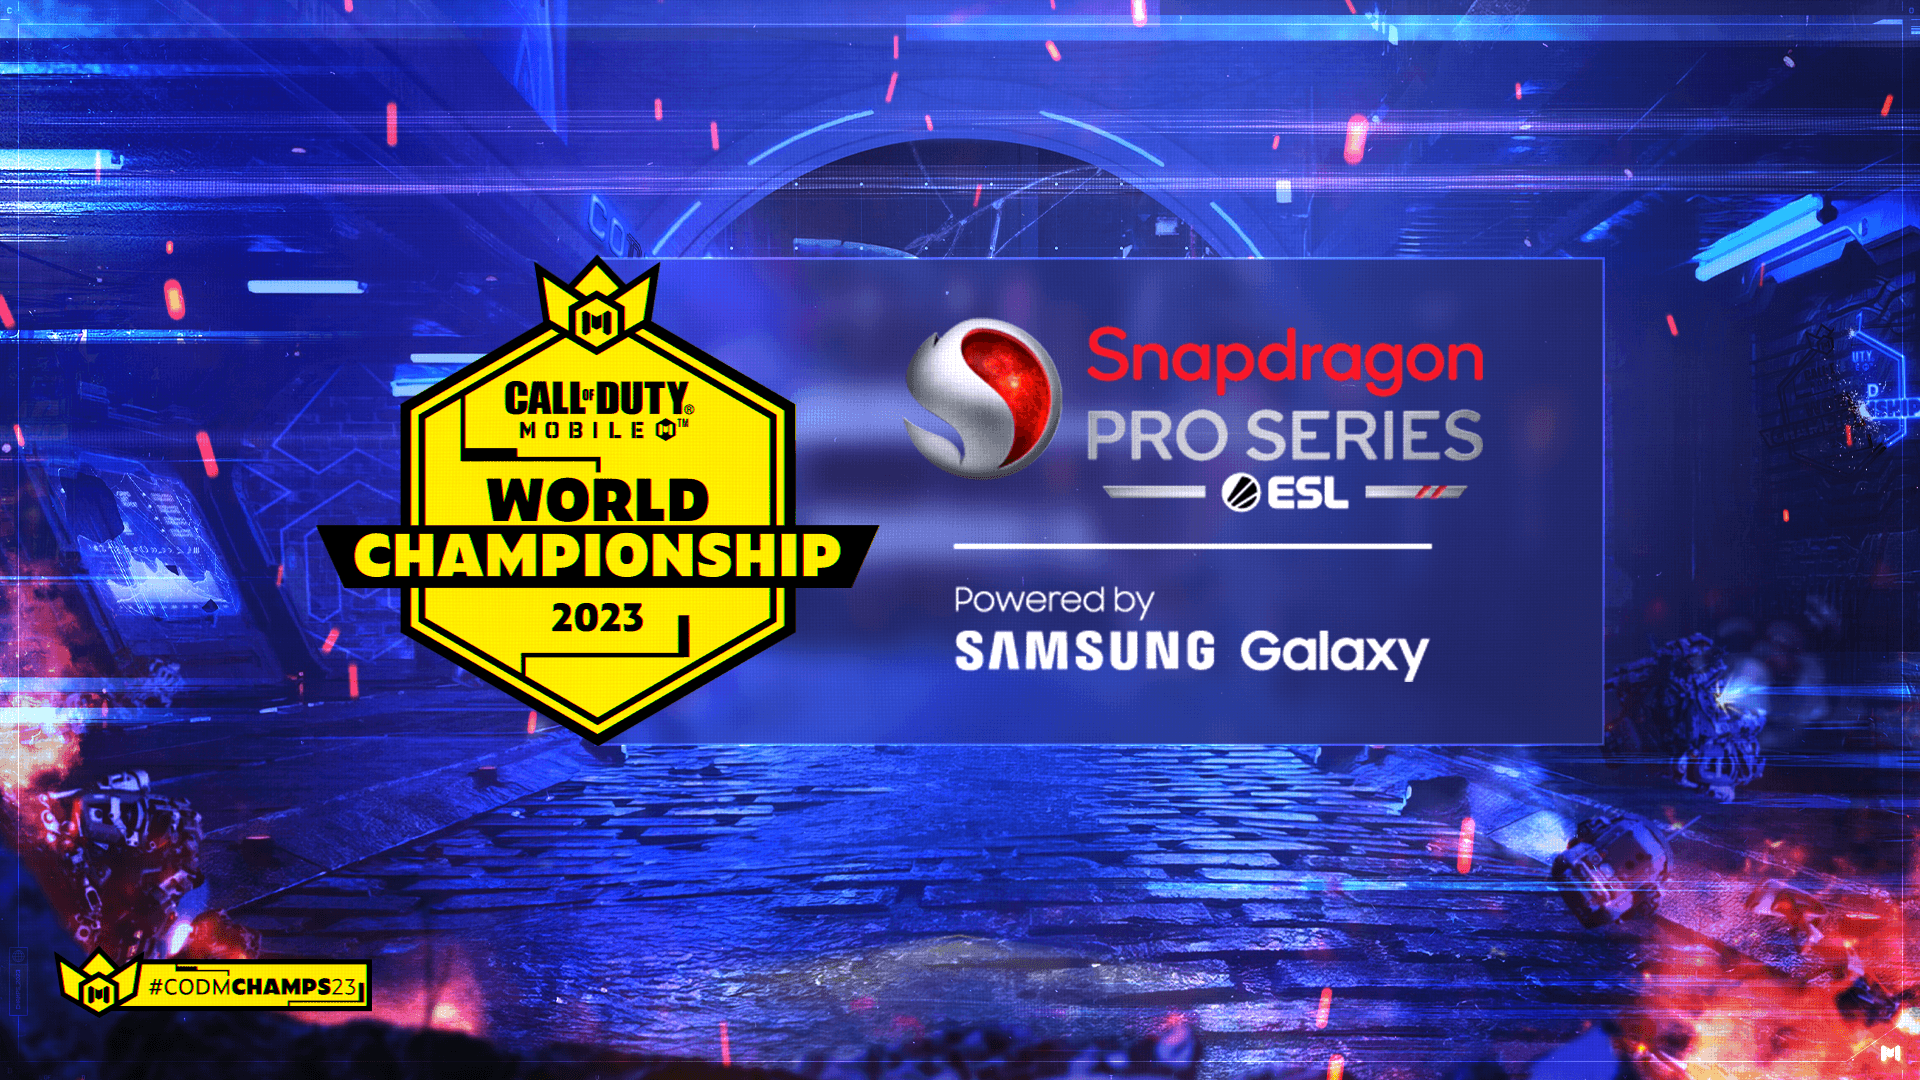 Call of Duty®: Mobile World Championship 2022 Kicks Off March 31